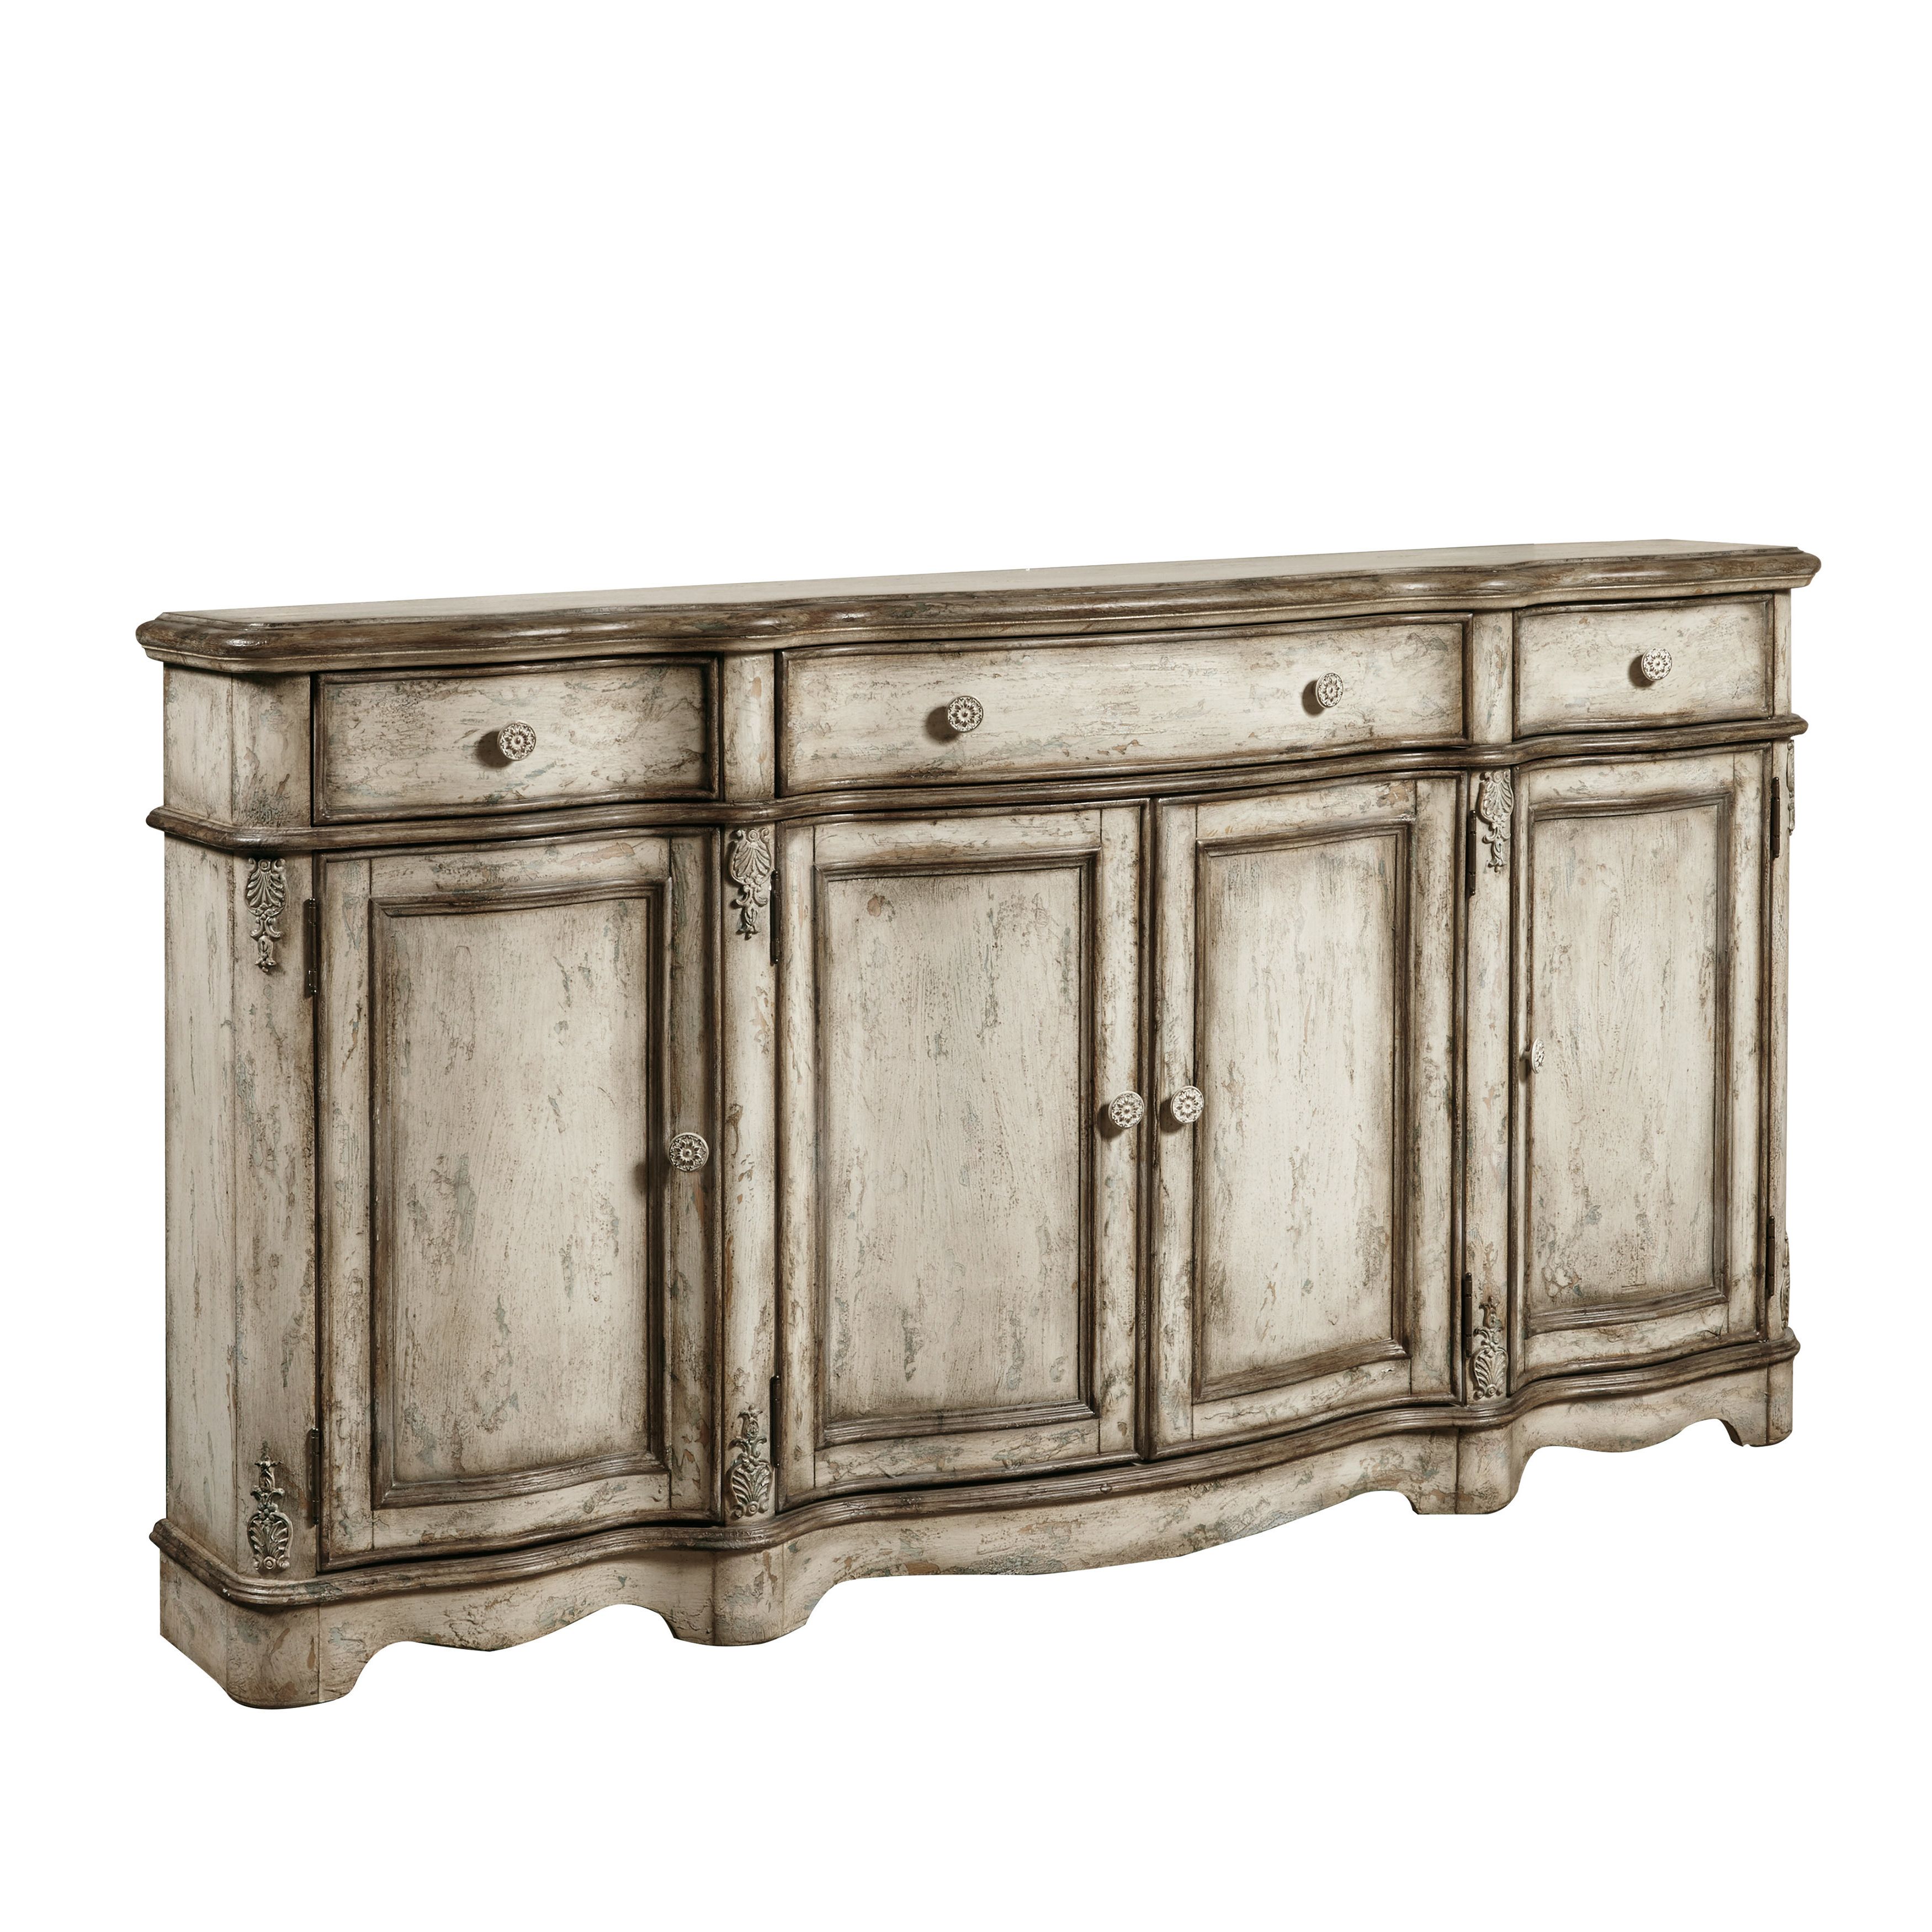 Farmhouse & Rustic Sideboards & Buffets | Birch Lane With Regard To Adelbert Credenzas (View 8 of 20)